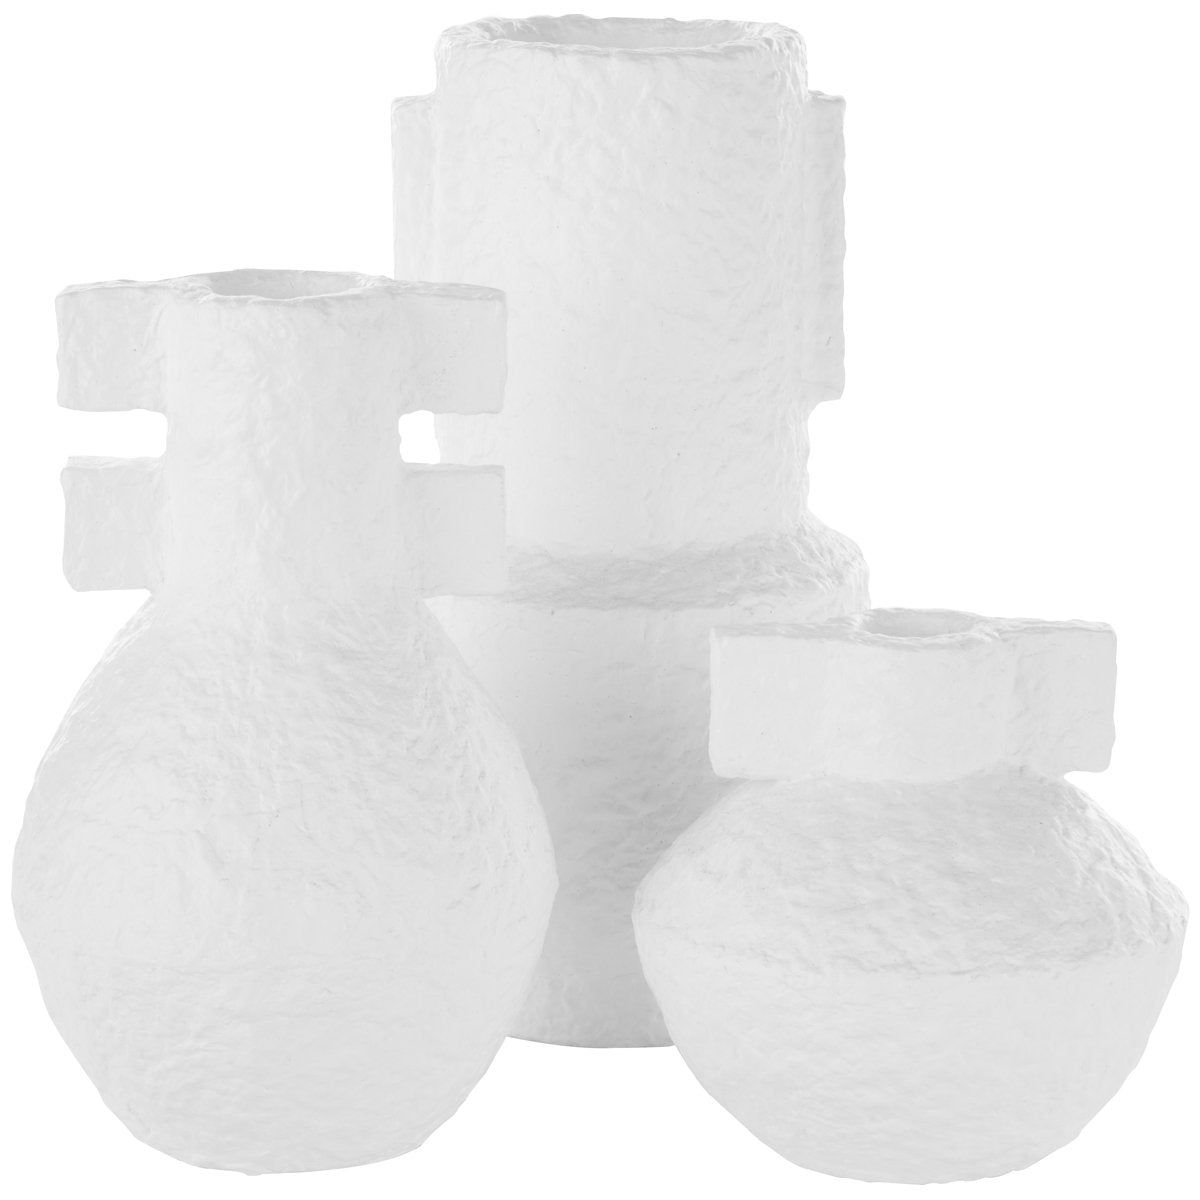 Currey and Company Aegean White Vase, 3-Piece Set